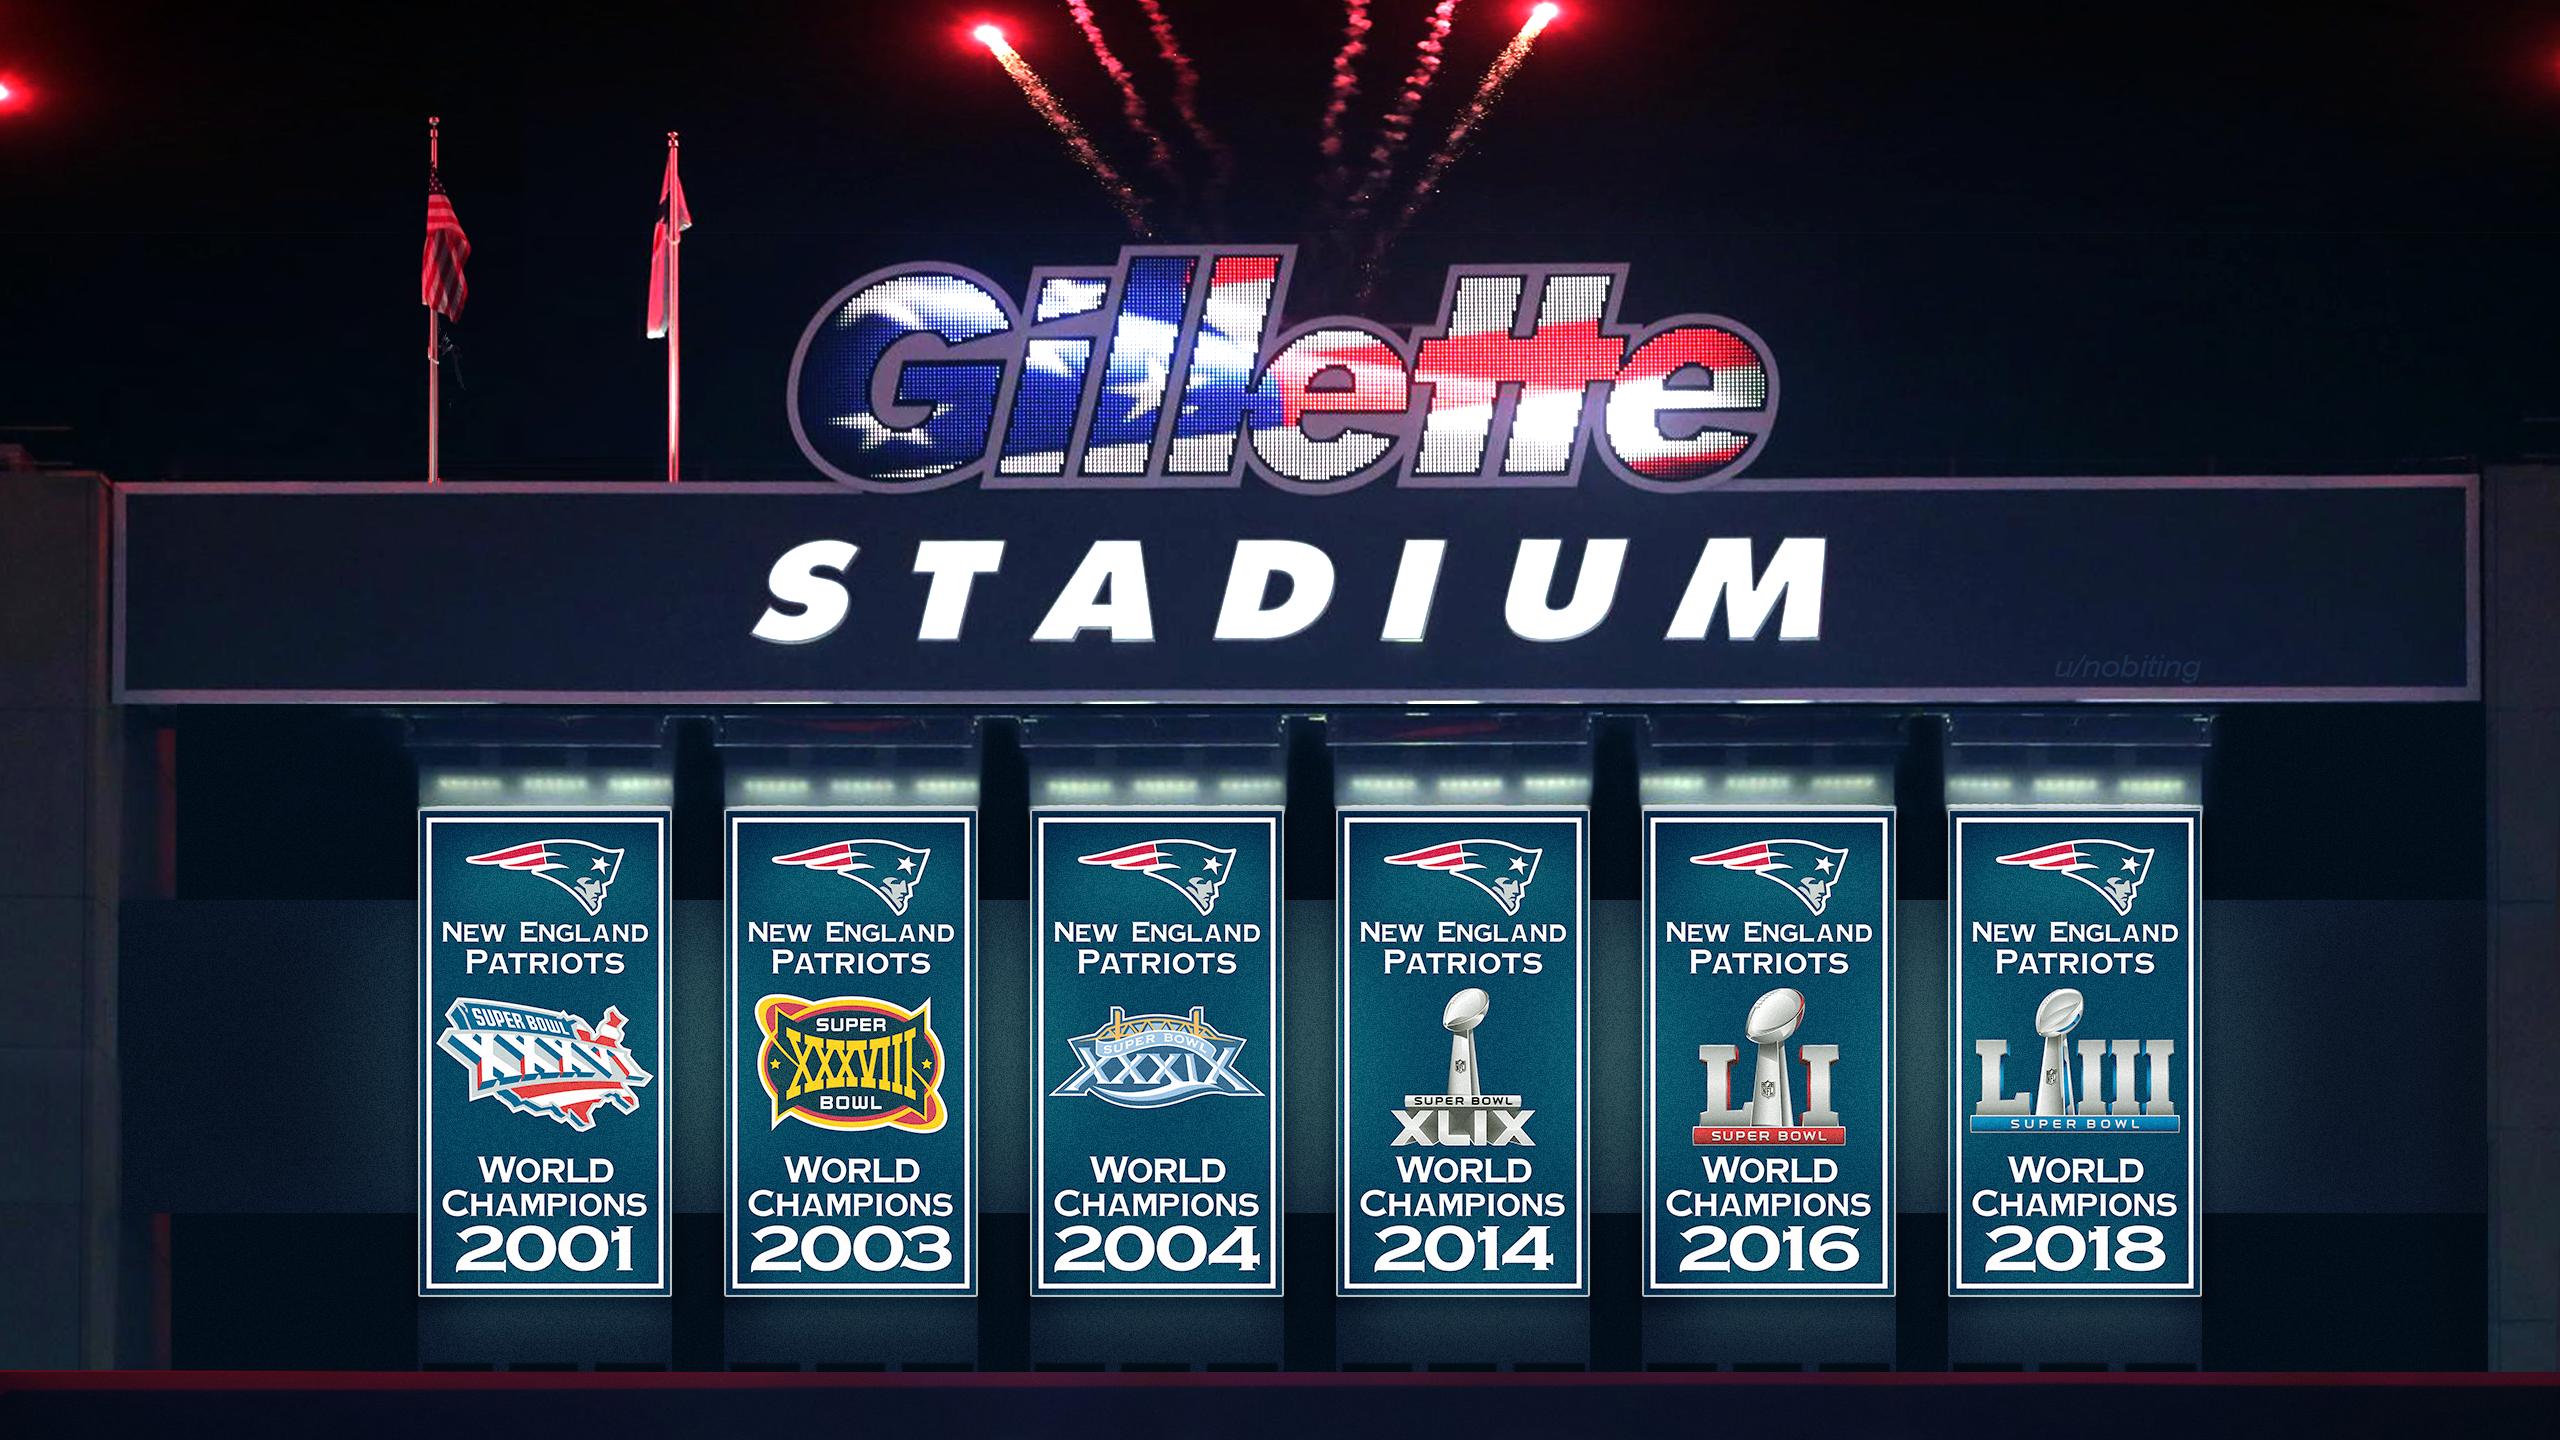 Patriots 2018 Wallpapers High Quality, Top Wallpapers - Patriots Super Bowl Banners At Gillette Stadium , HD Wallpaper & Backgrounds